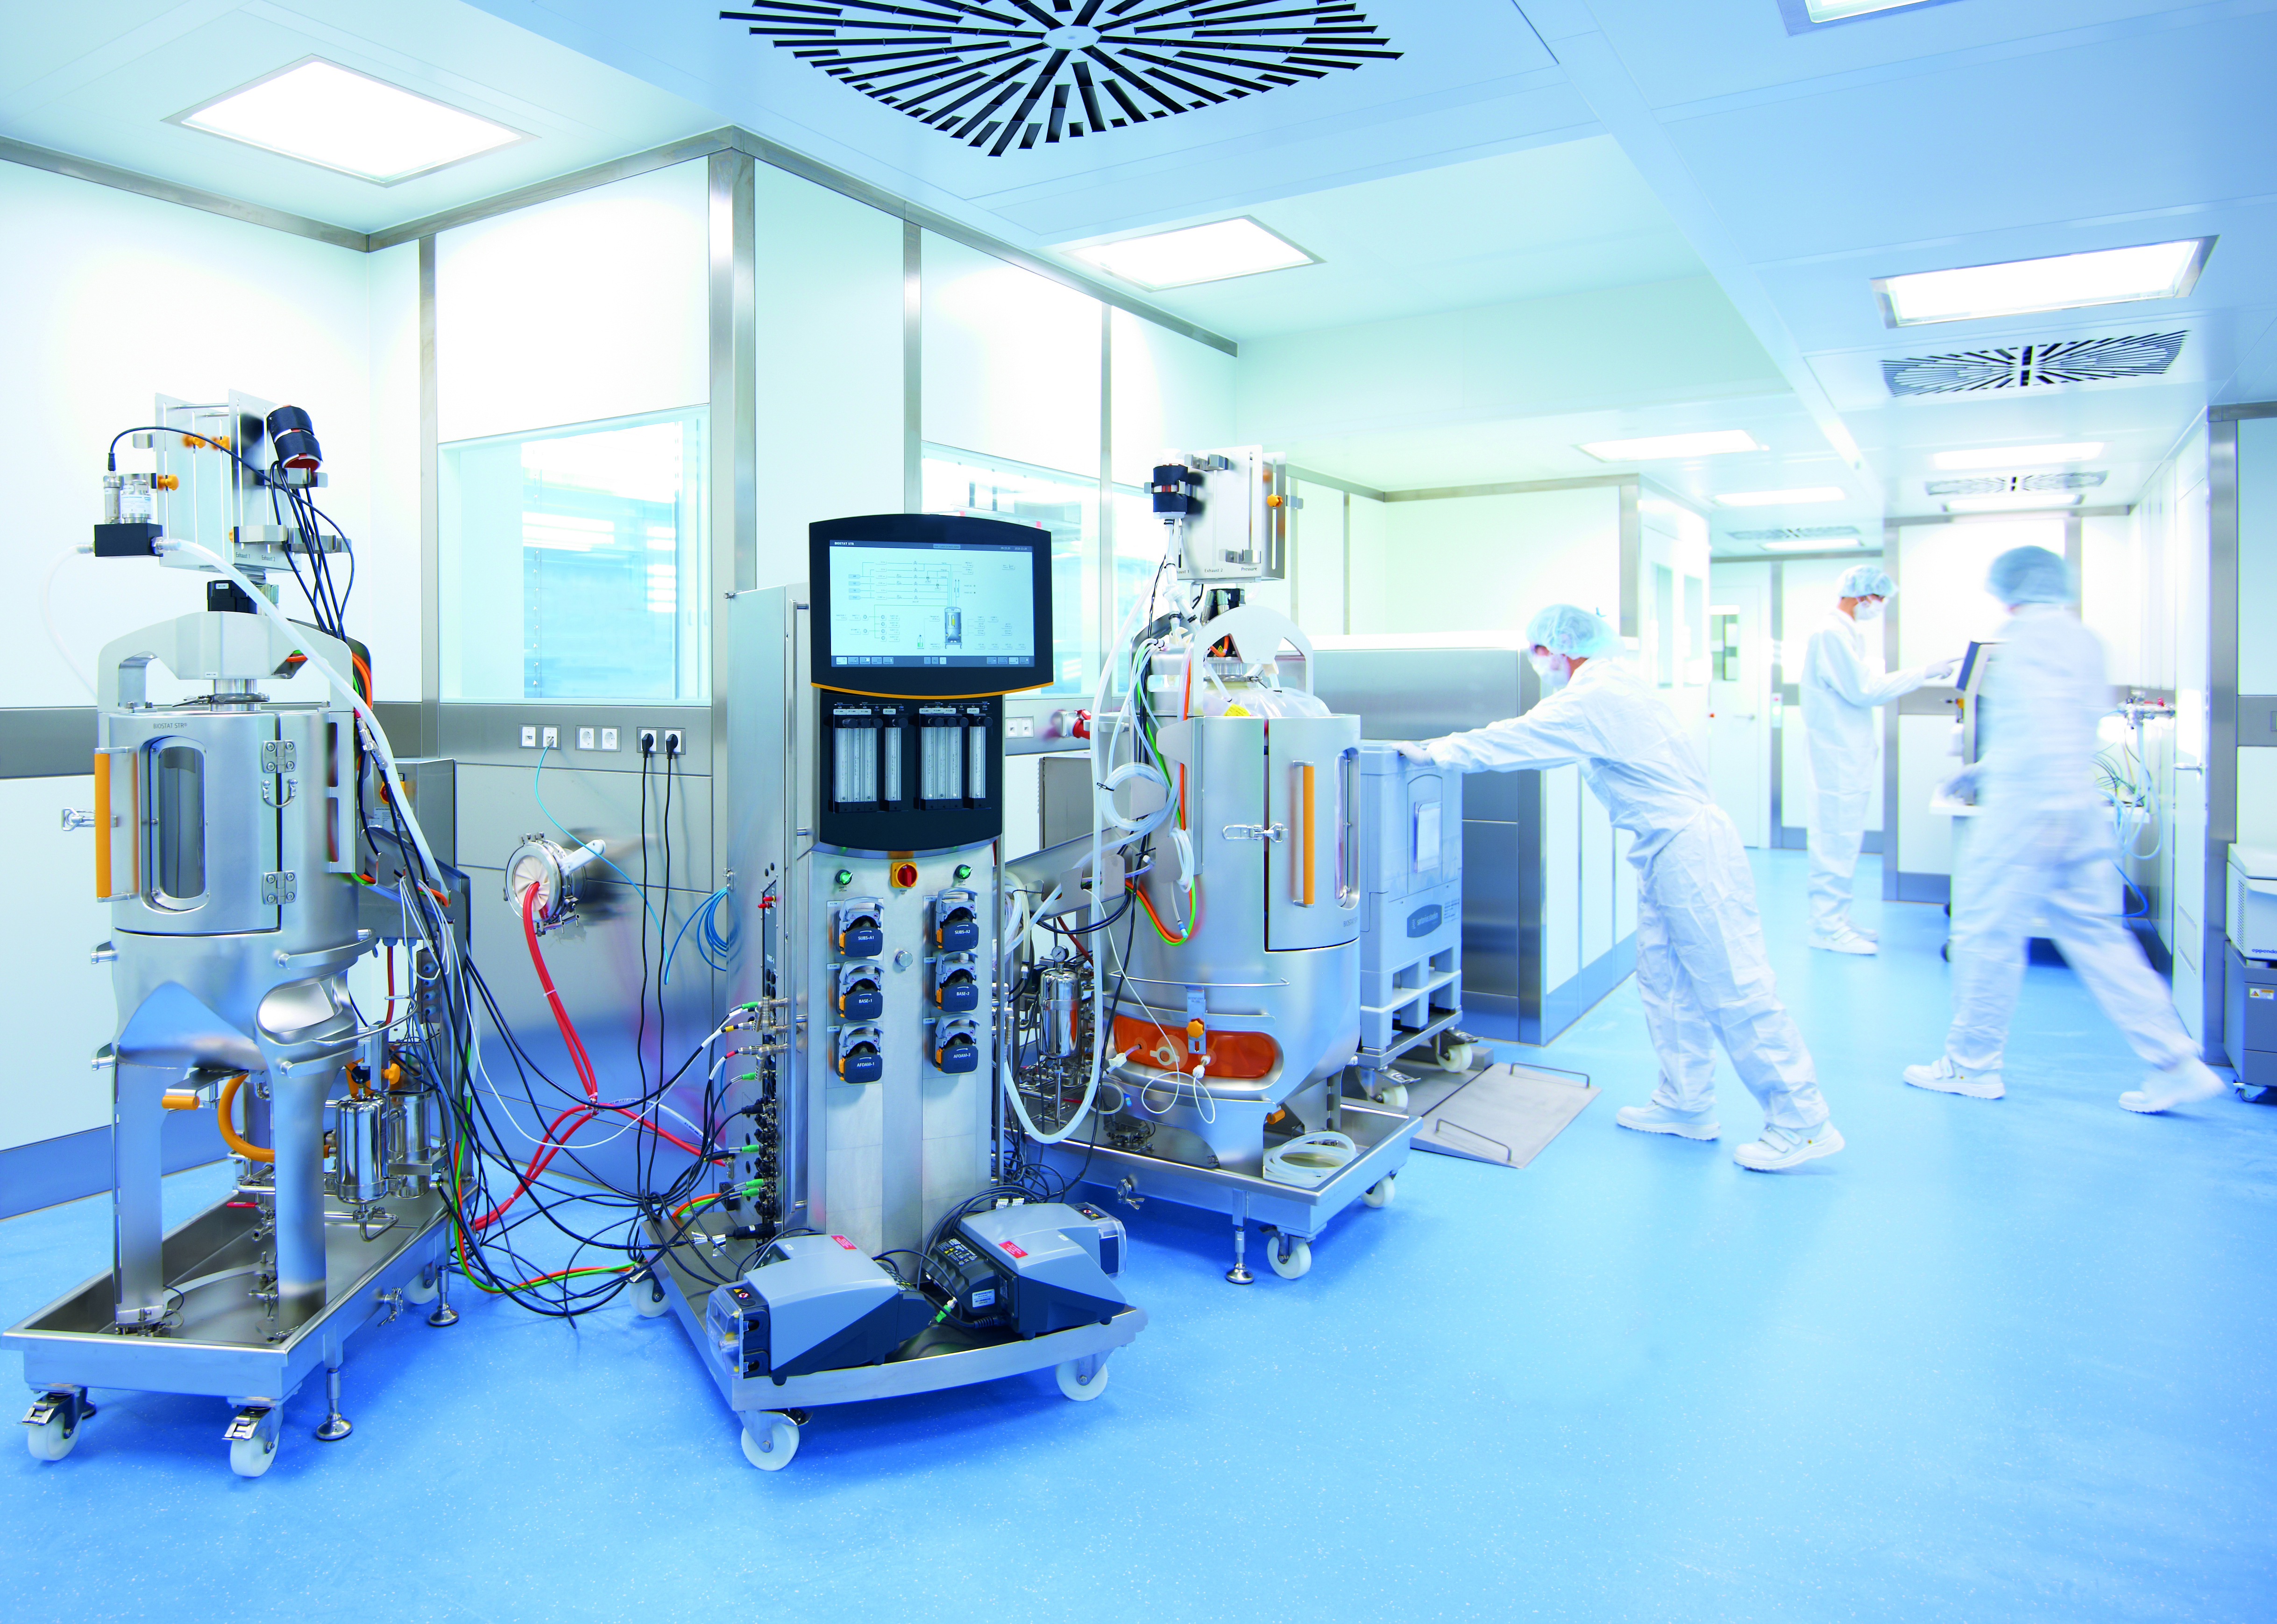 The photo shows a cleanroom with equipment used for downstream processing and some employees wearing GMP-compliant safety clothing.